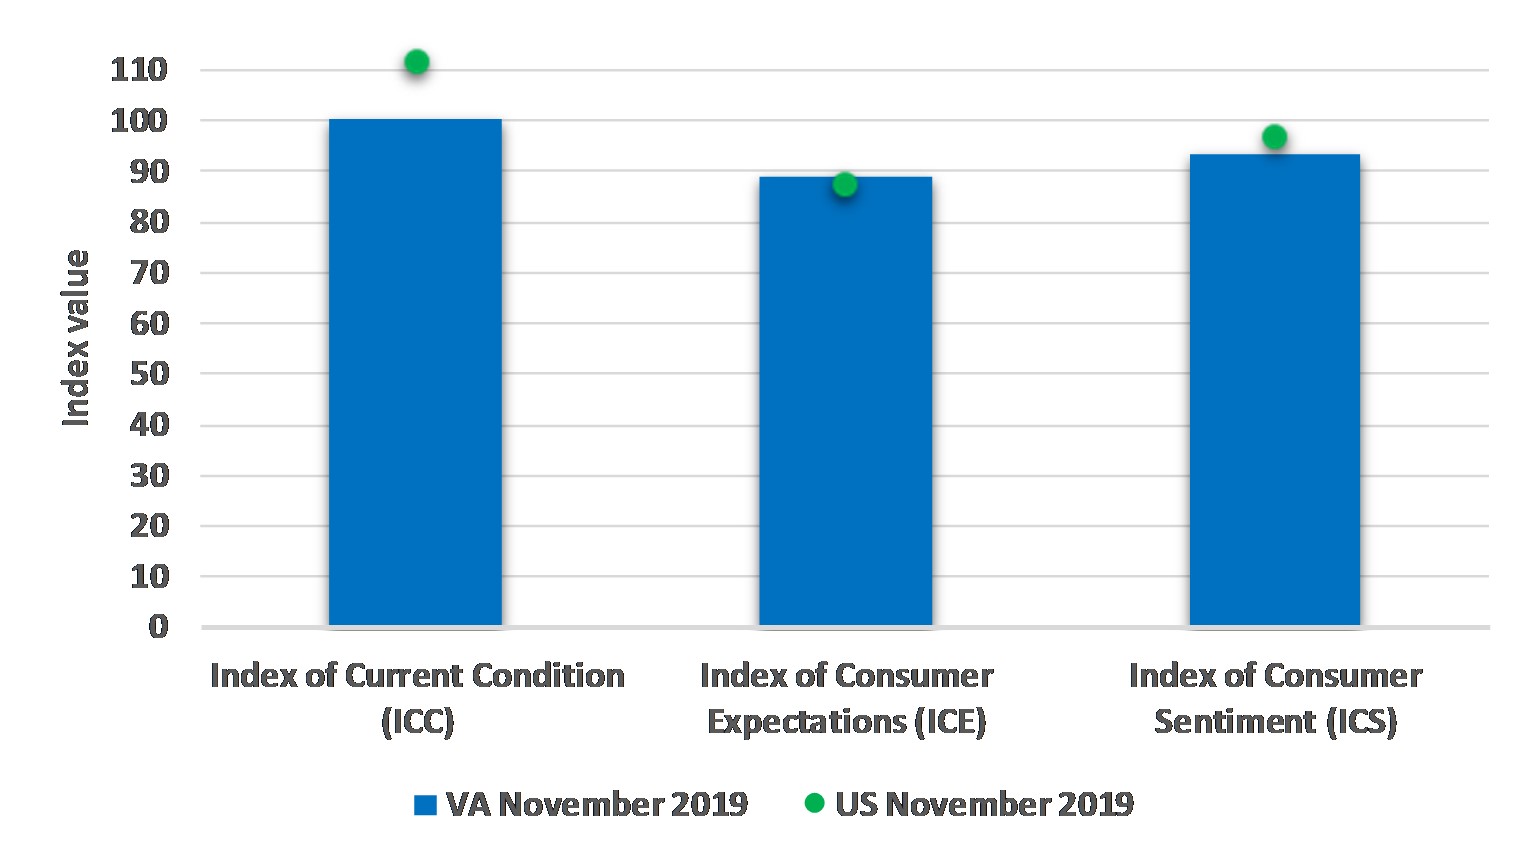 The figure is a bar chart showing the three sentiment measures (current conditions, expectations, and overall sentiment) for both the US and Virginia in August 2019.